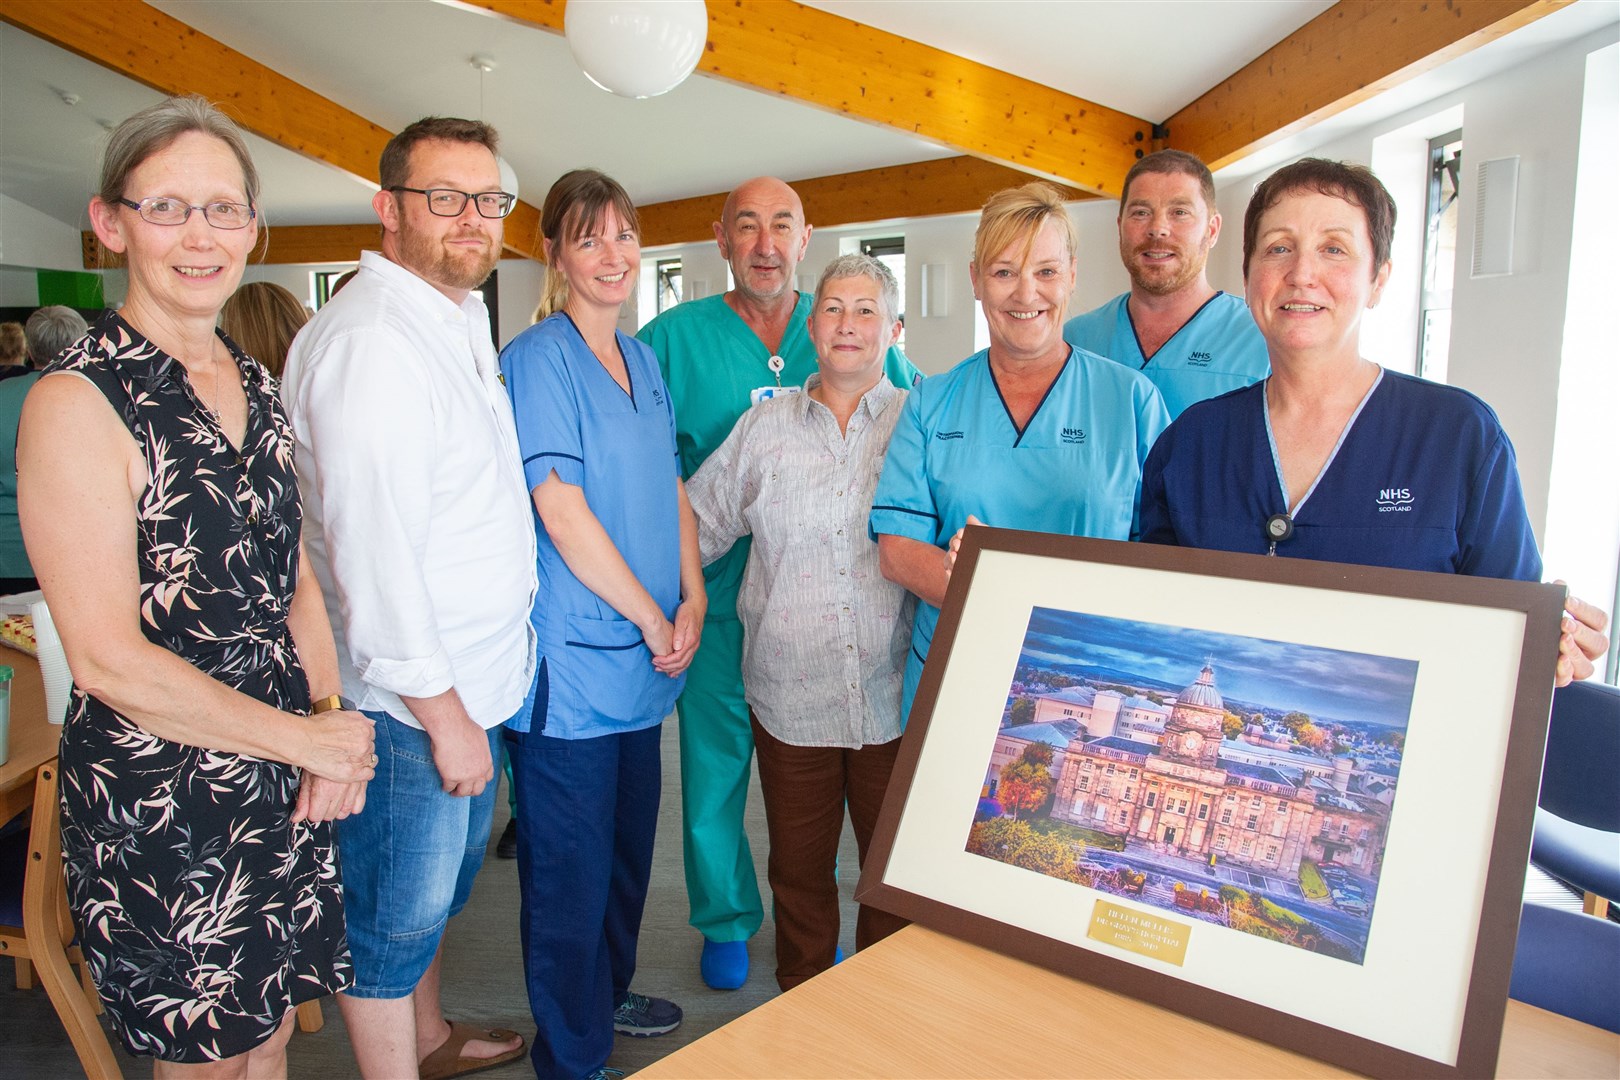 Helen was presented with a framed picture of Dr Gray's as one of her many leaving presents. Picture: Daniel Forsyth. Image No.044541.